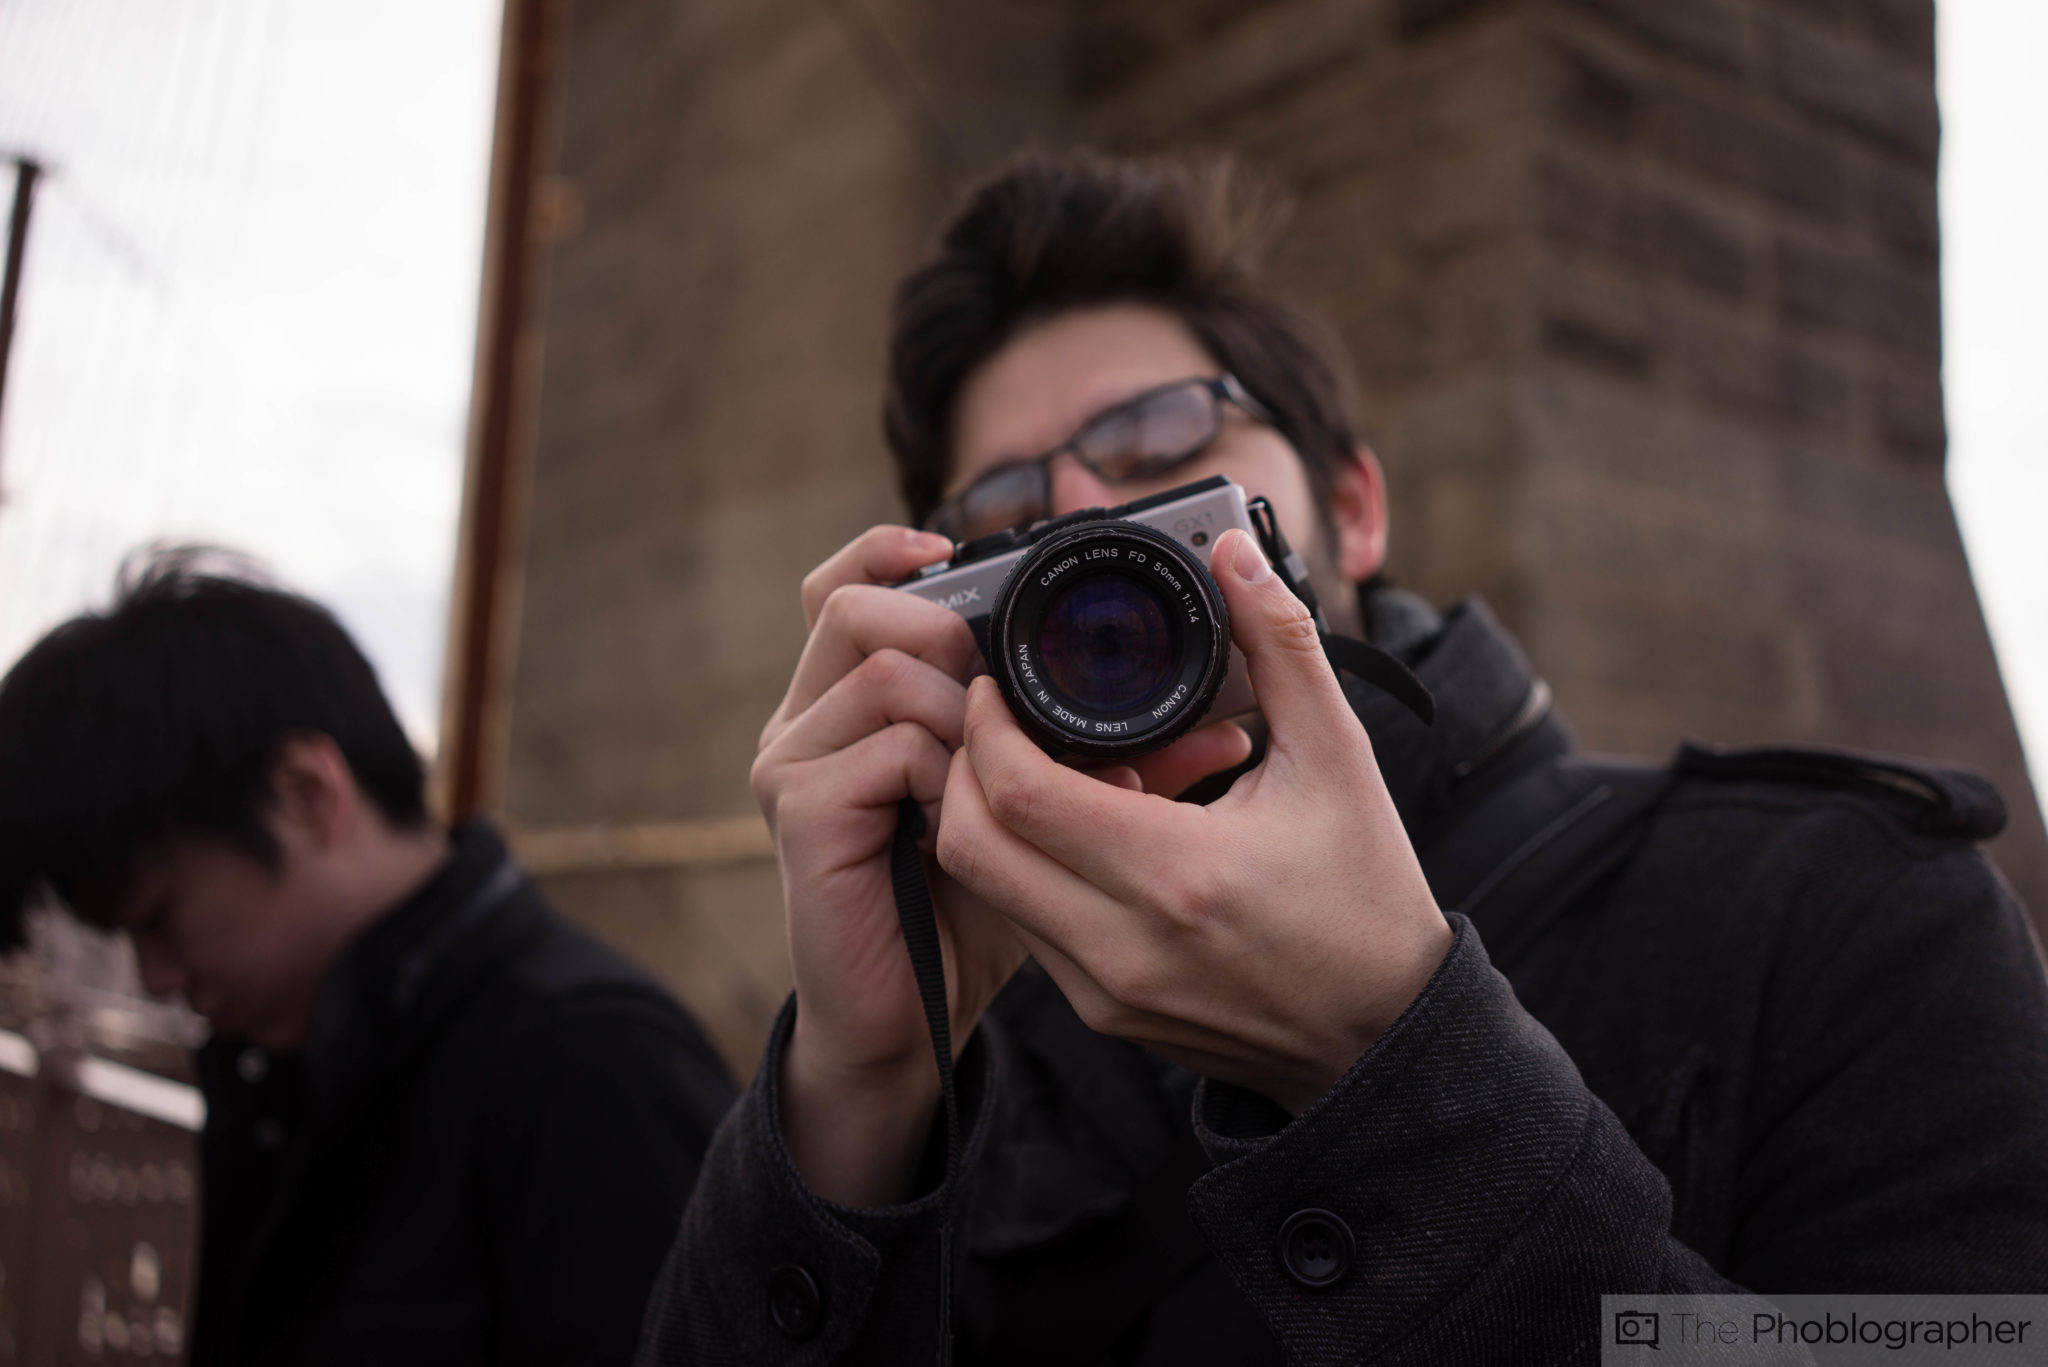 Chris Gampat The Phoblographer Sony A7r review photos brooklyn bridge reddit walk (4 of 14)ISO 1001-800 sec at f - 3.2